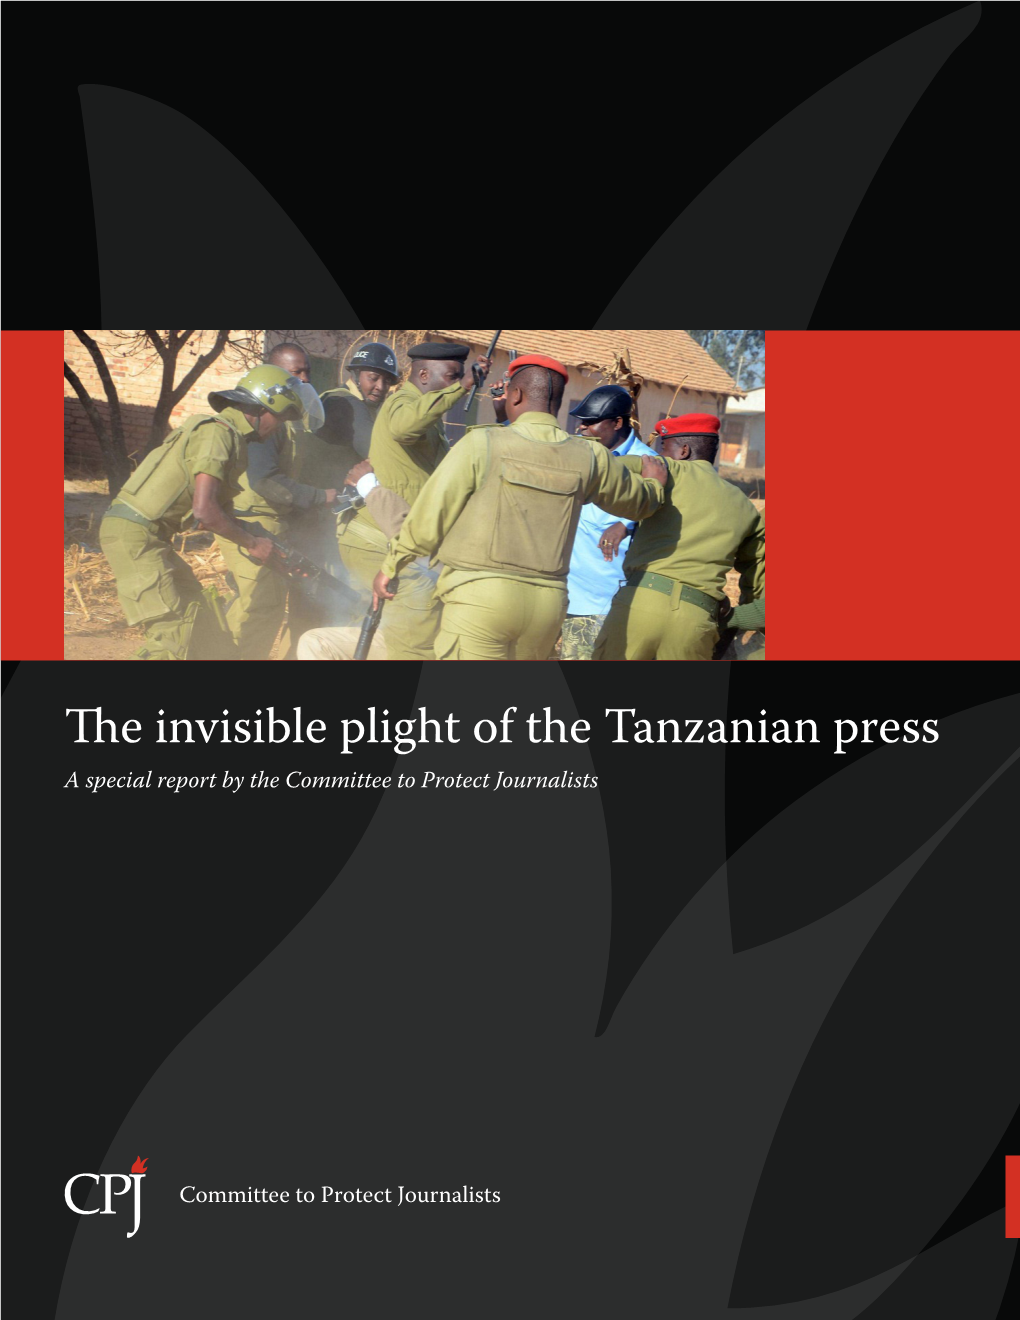 The Invisible Plight of the Tanzanian Press a Special Report by the Committee to Protect Journalists